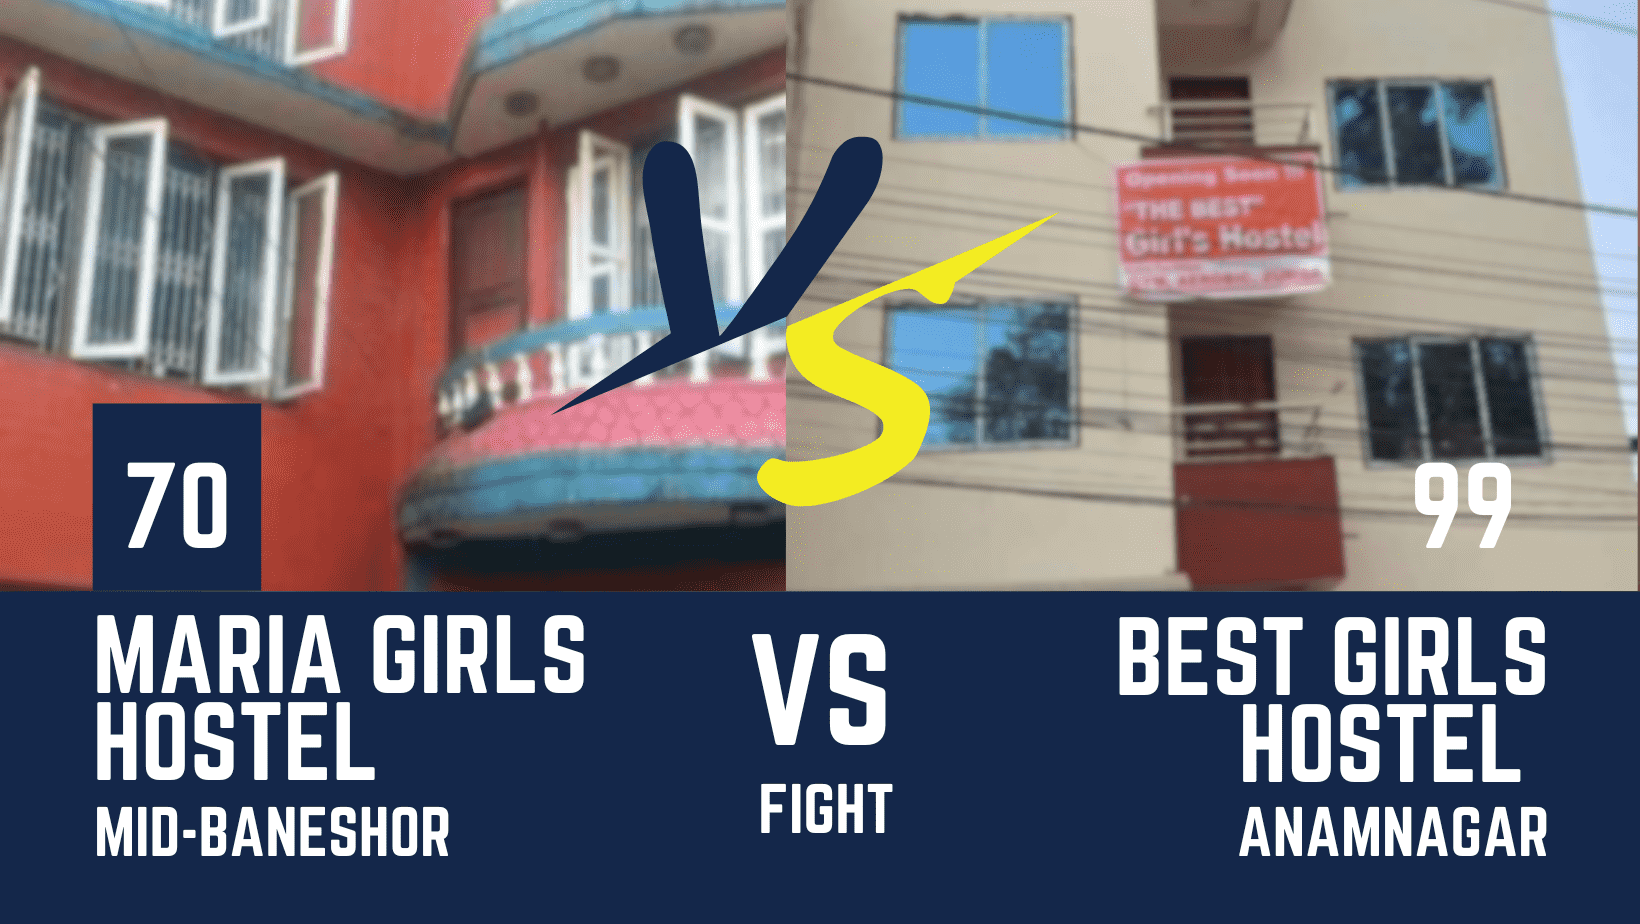 comparing-the-best-girls-hostel-and-maria-girls-hostel-finding-the-ideal-stay-for-students-in-kathmandu